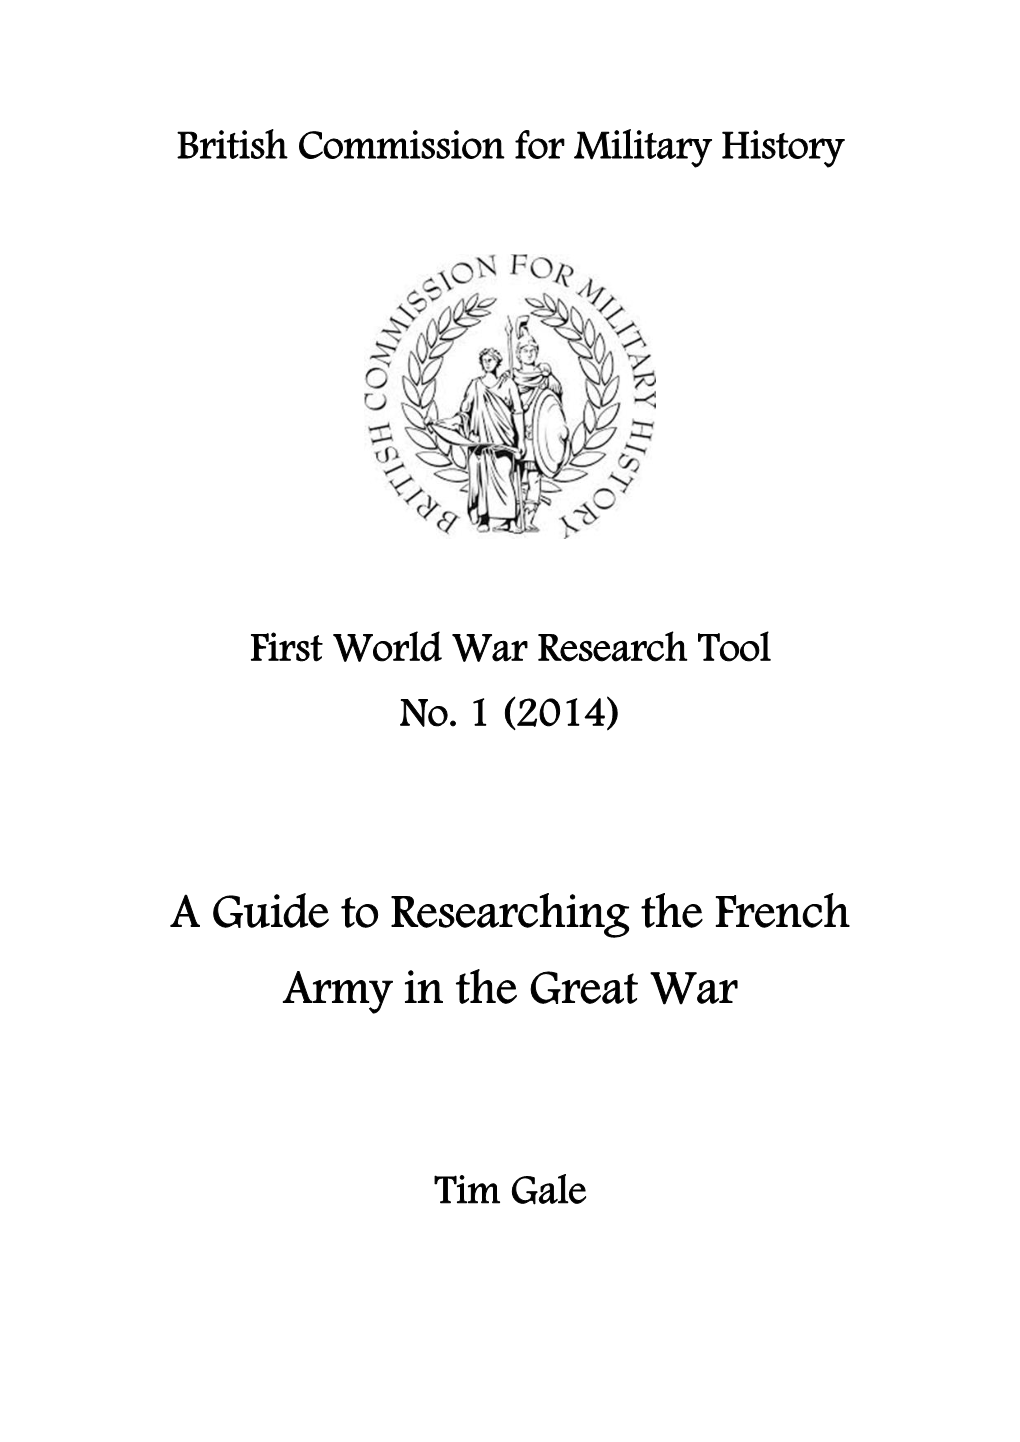 Researching the French Army in the Great War